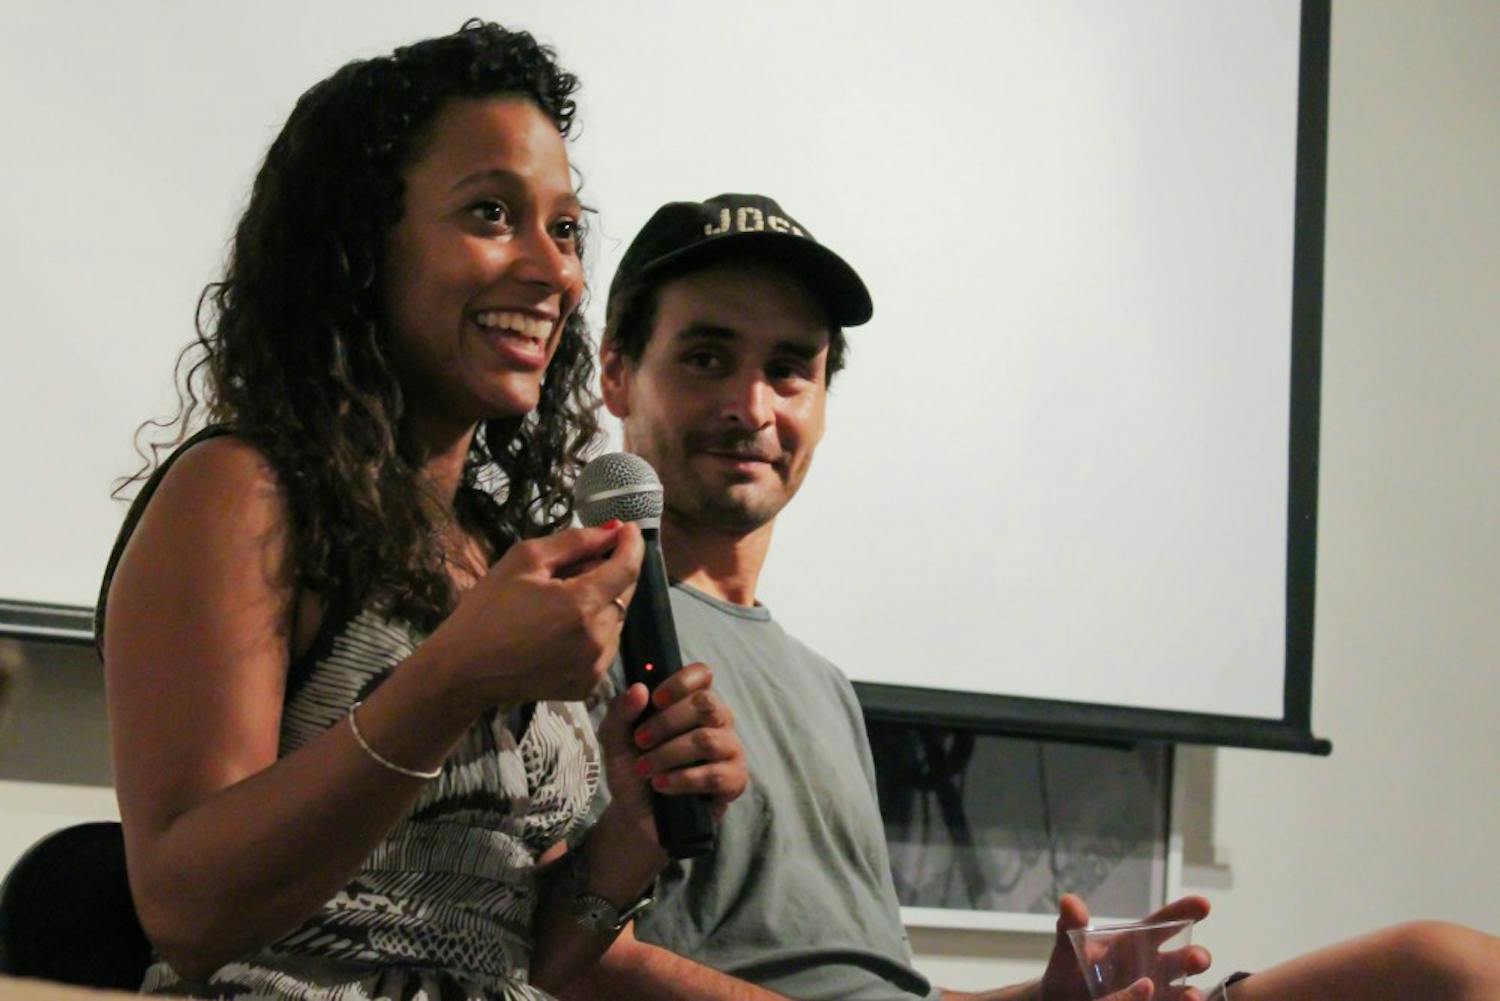 Estrella Payton (left) and Gabriel Rico (right) talk about their experiences with the Residencias Artistícas Artist exchange program at the ASU Art Museum Project Space in Phoenix, Arizona on Tuesday, Aug. 29, 2017.